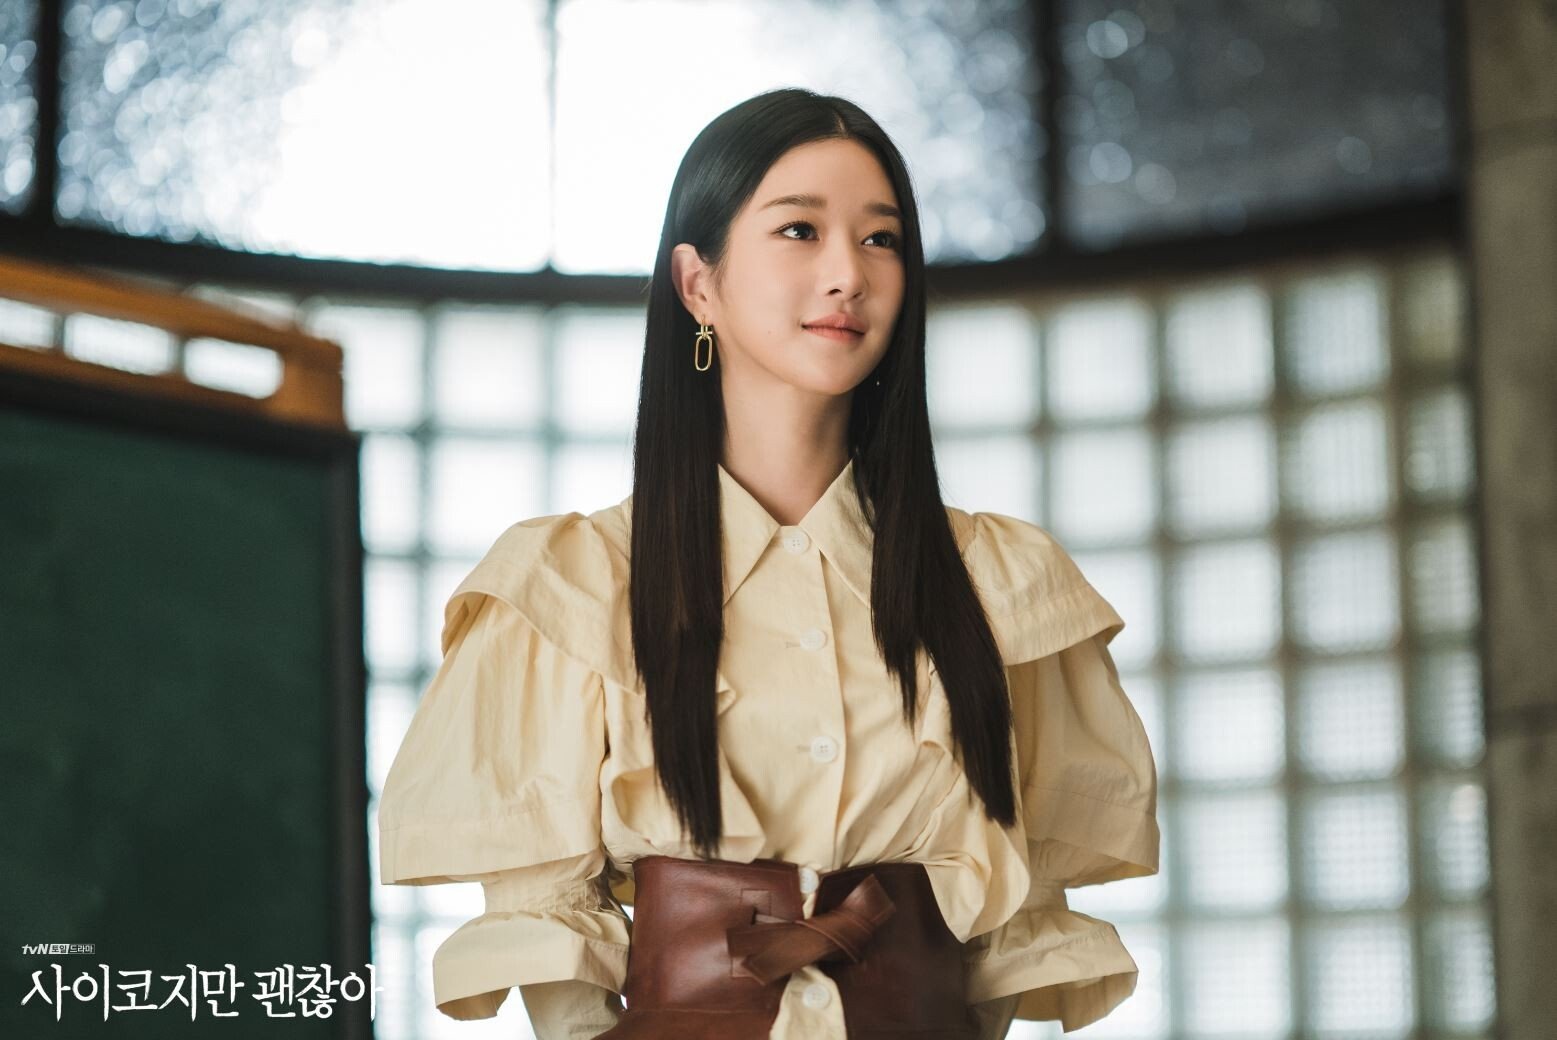 Seo Ye-ji in one of her more casual outfits: a puff-sleeved dress with an obi belt from Loewe. Photo: TvN